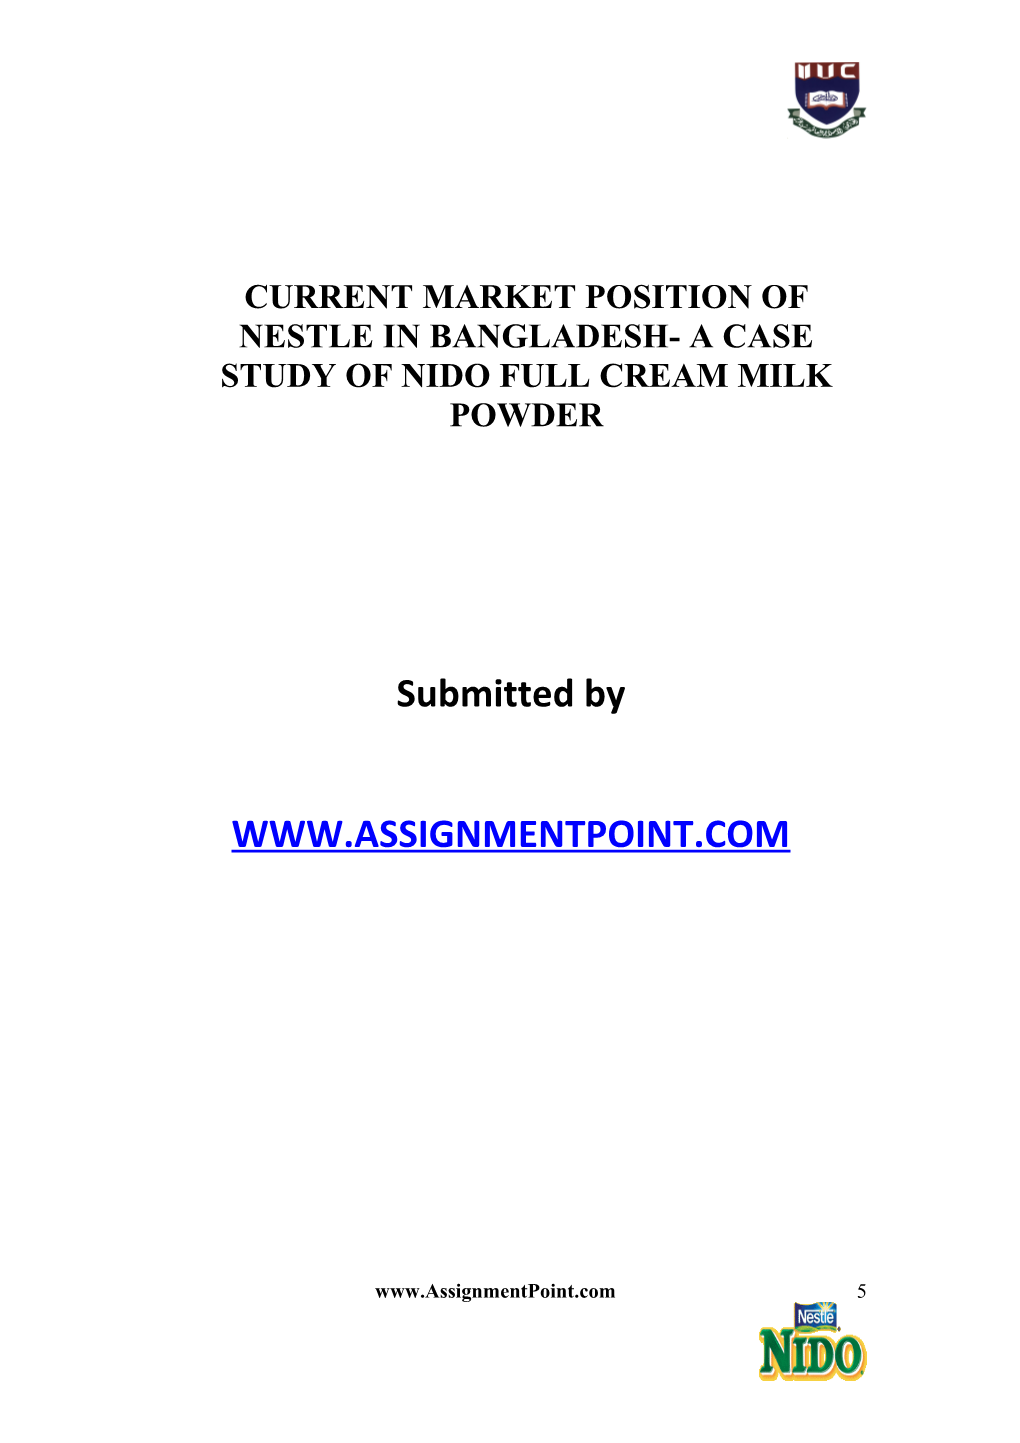 Current Market Position of Nestle in Bangladesh- a Case Study of Nido Full Cream Milk Powder